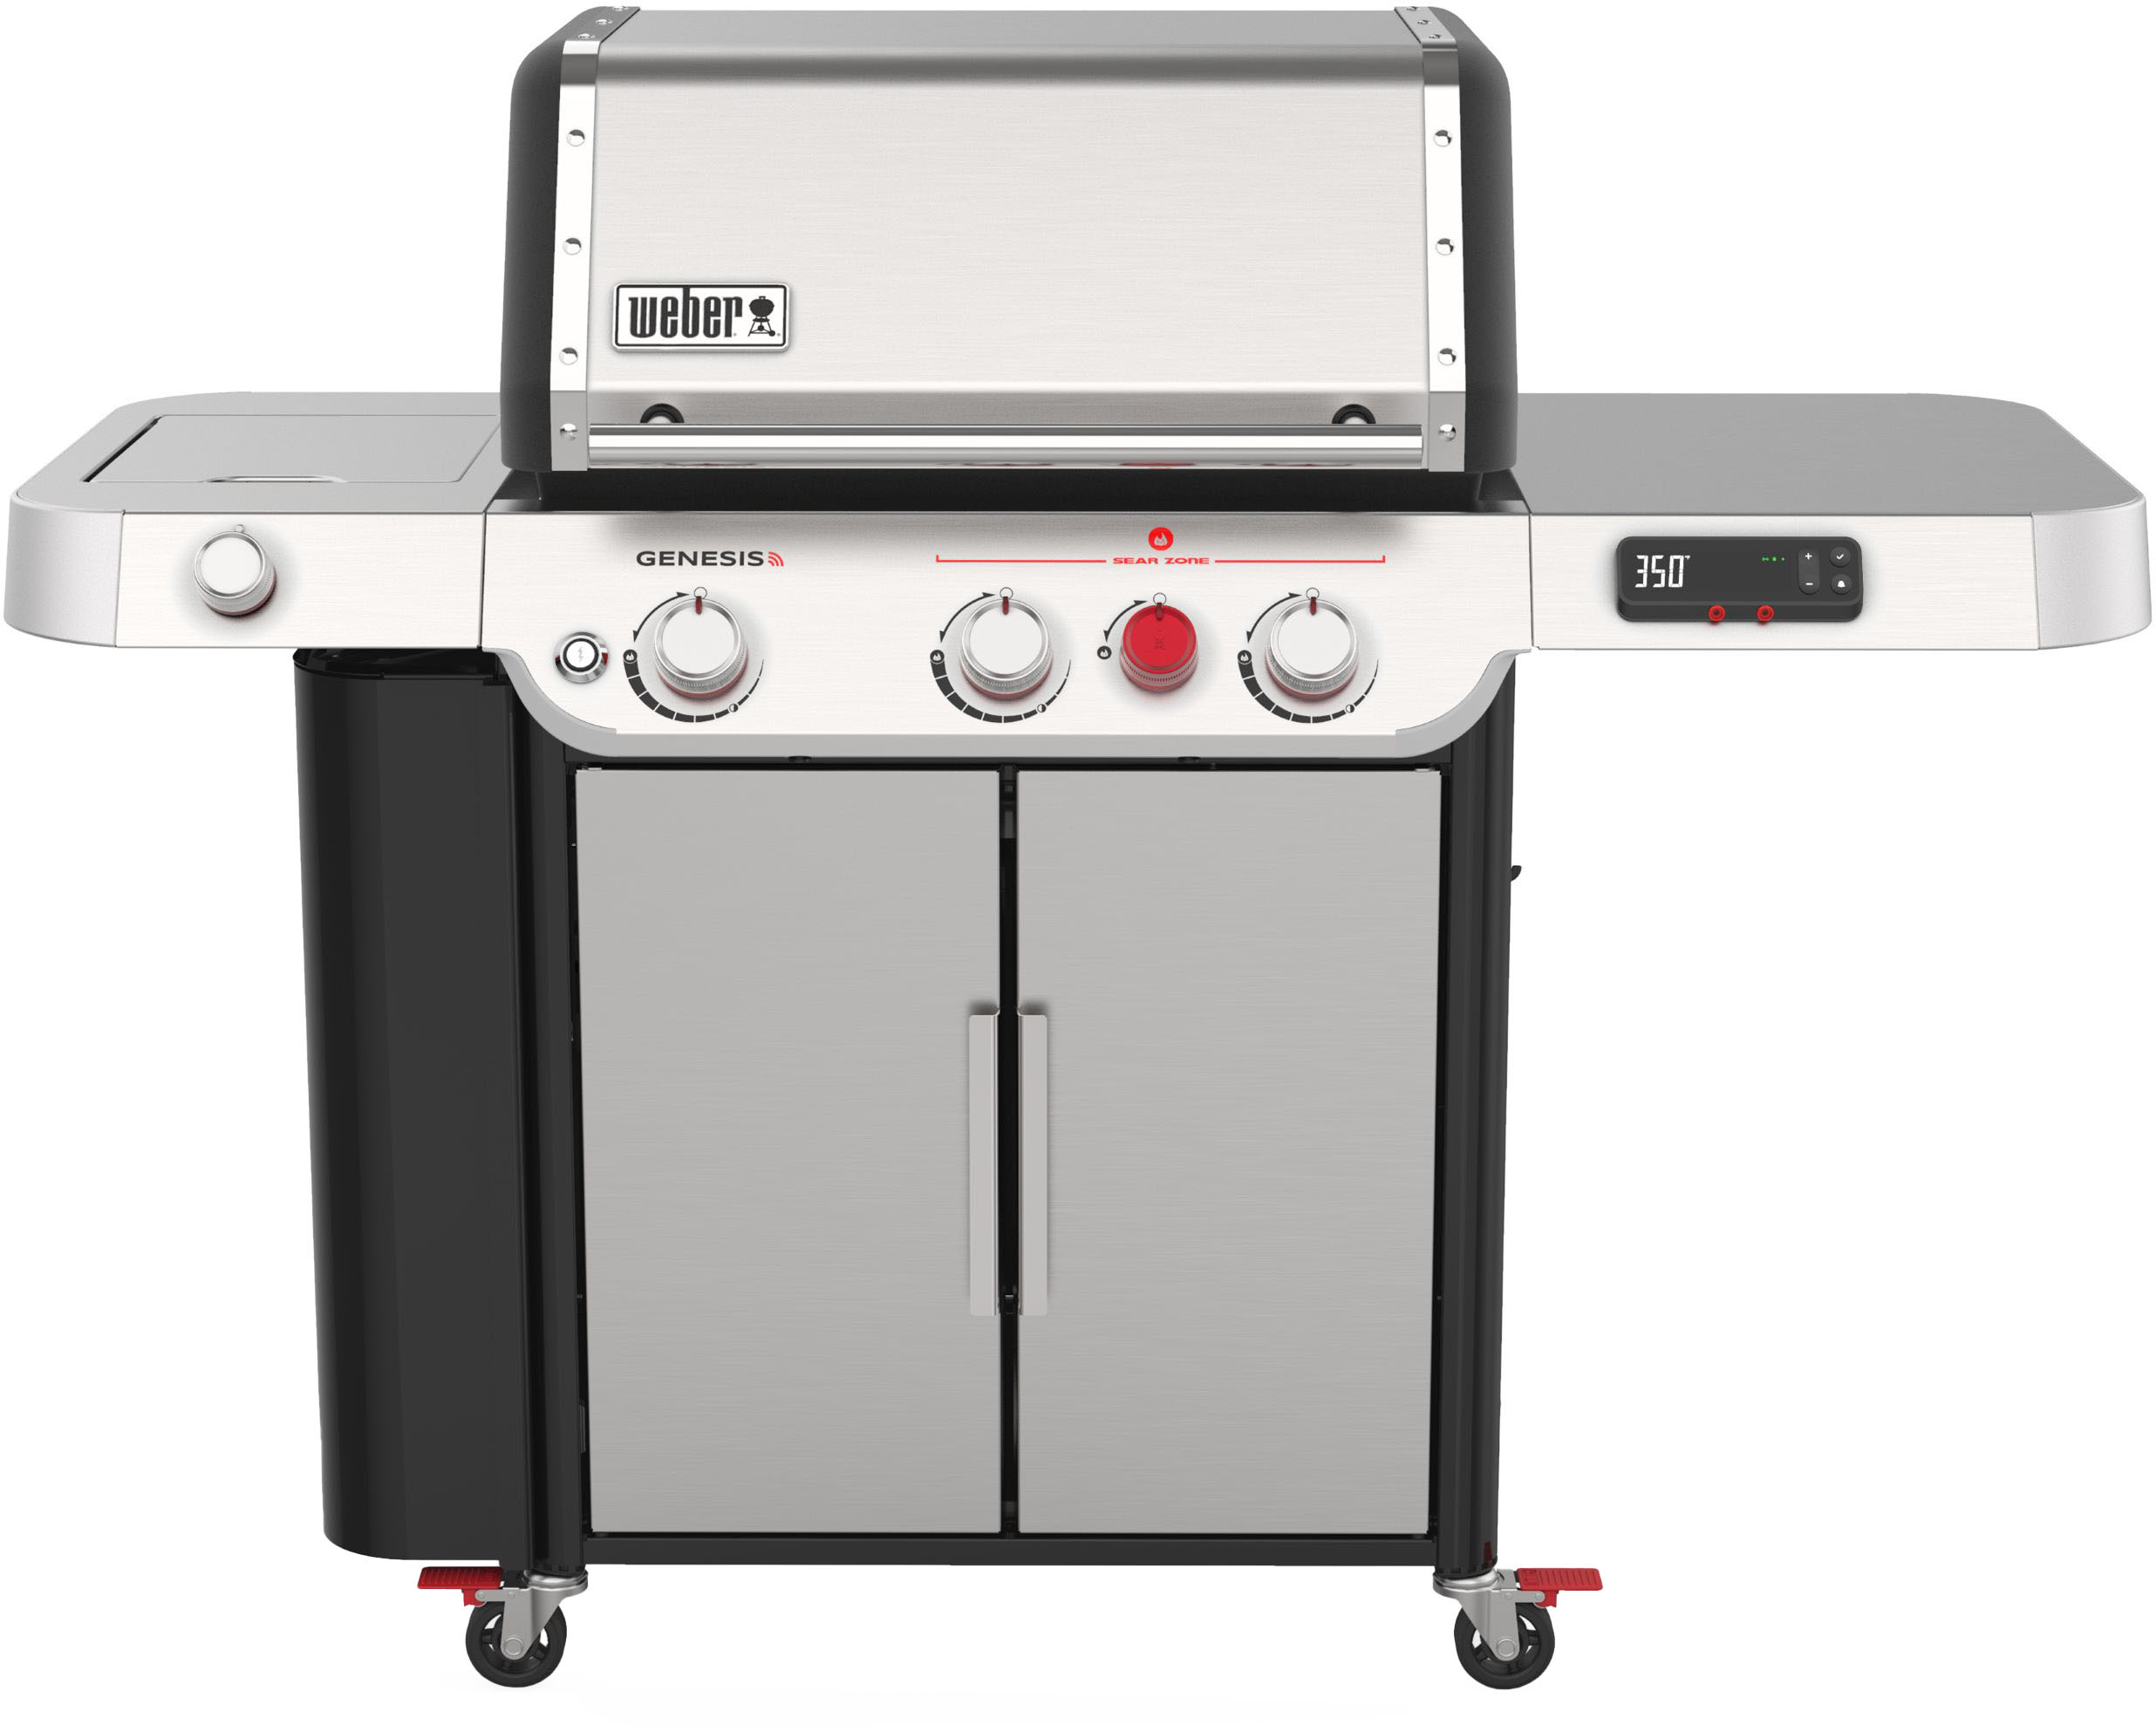 Angle View: Weber - Genesis Gas Grill SX-335 Propane Gas Grill - Stainless Steel